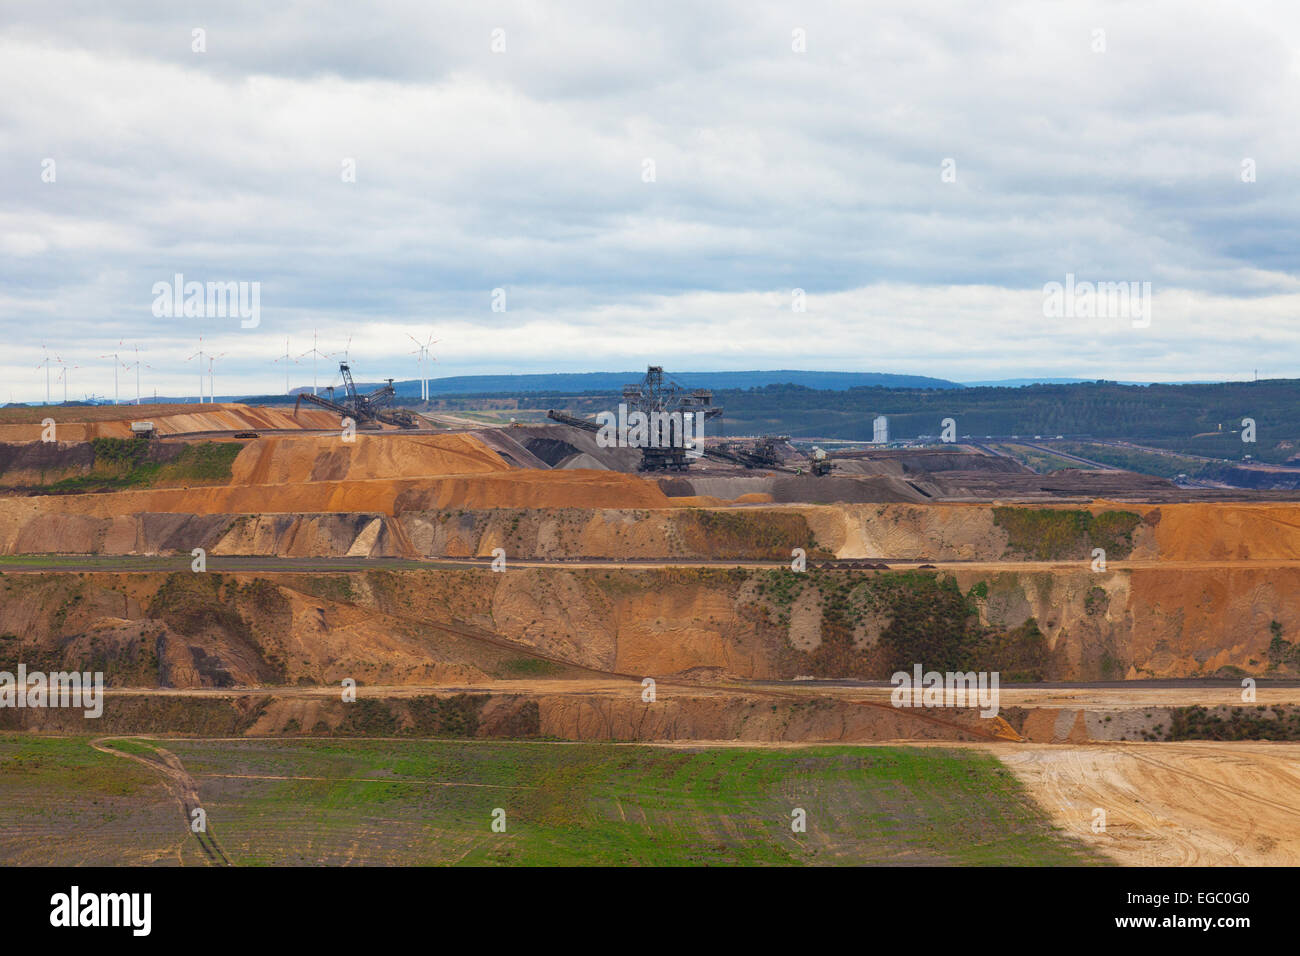 Bucket-wheel excavator in an open pit. landscape with extractive industry Stock Photo